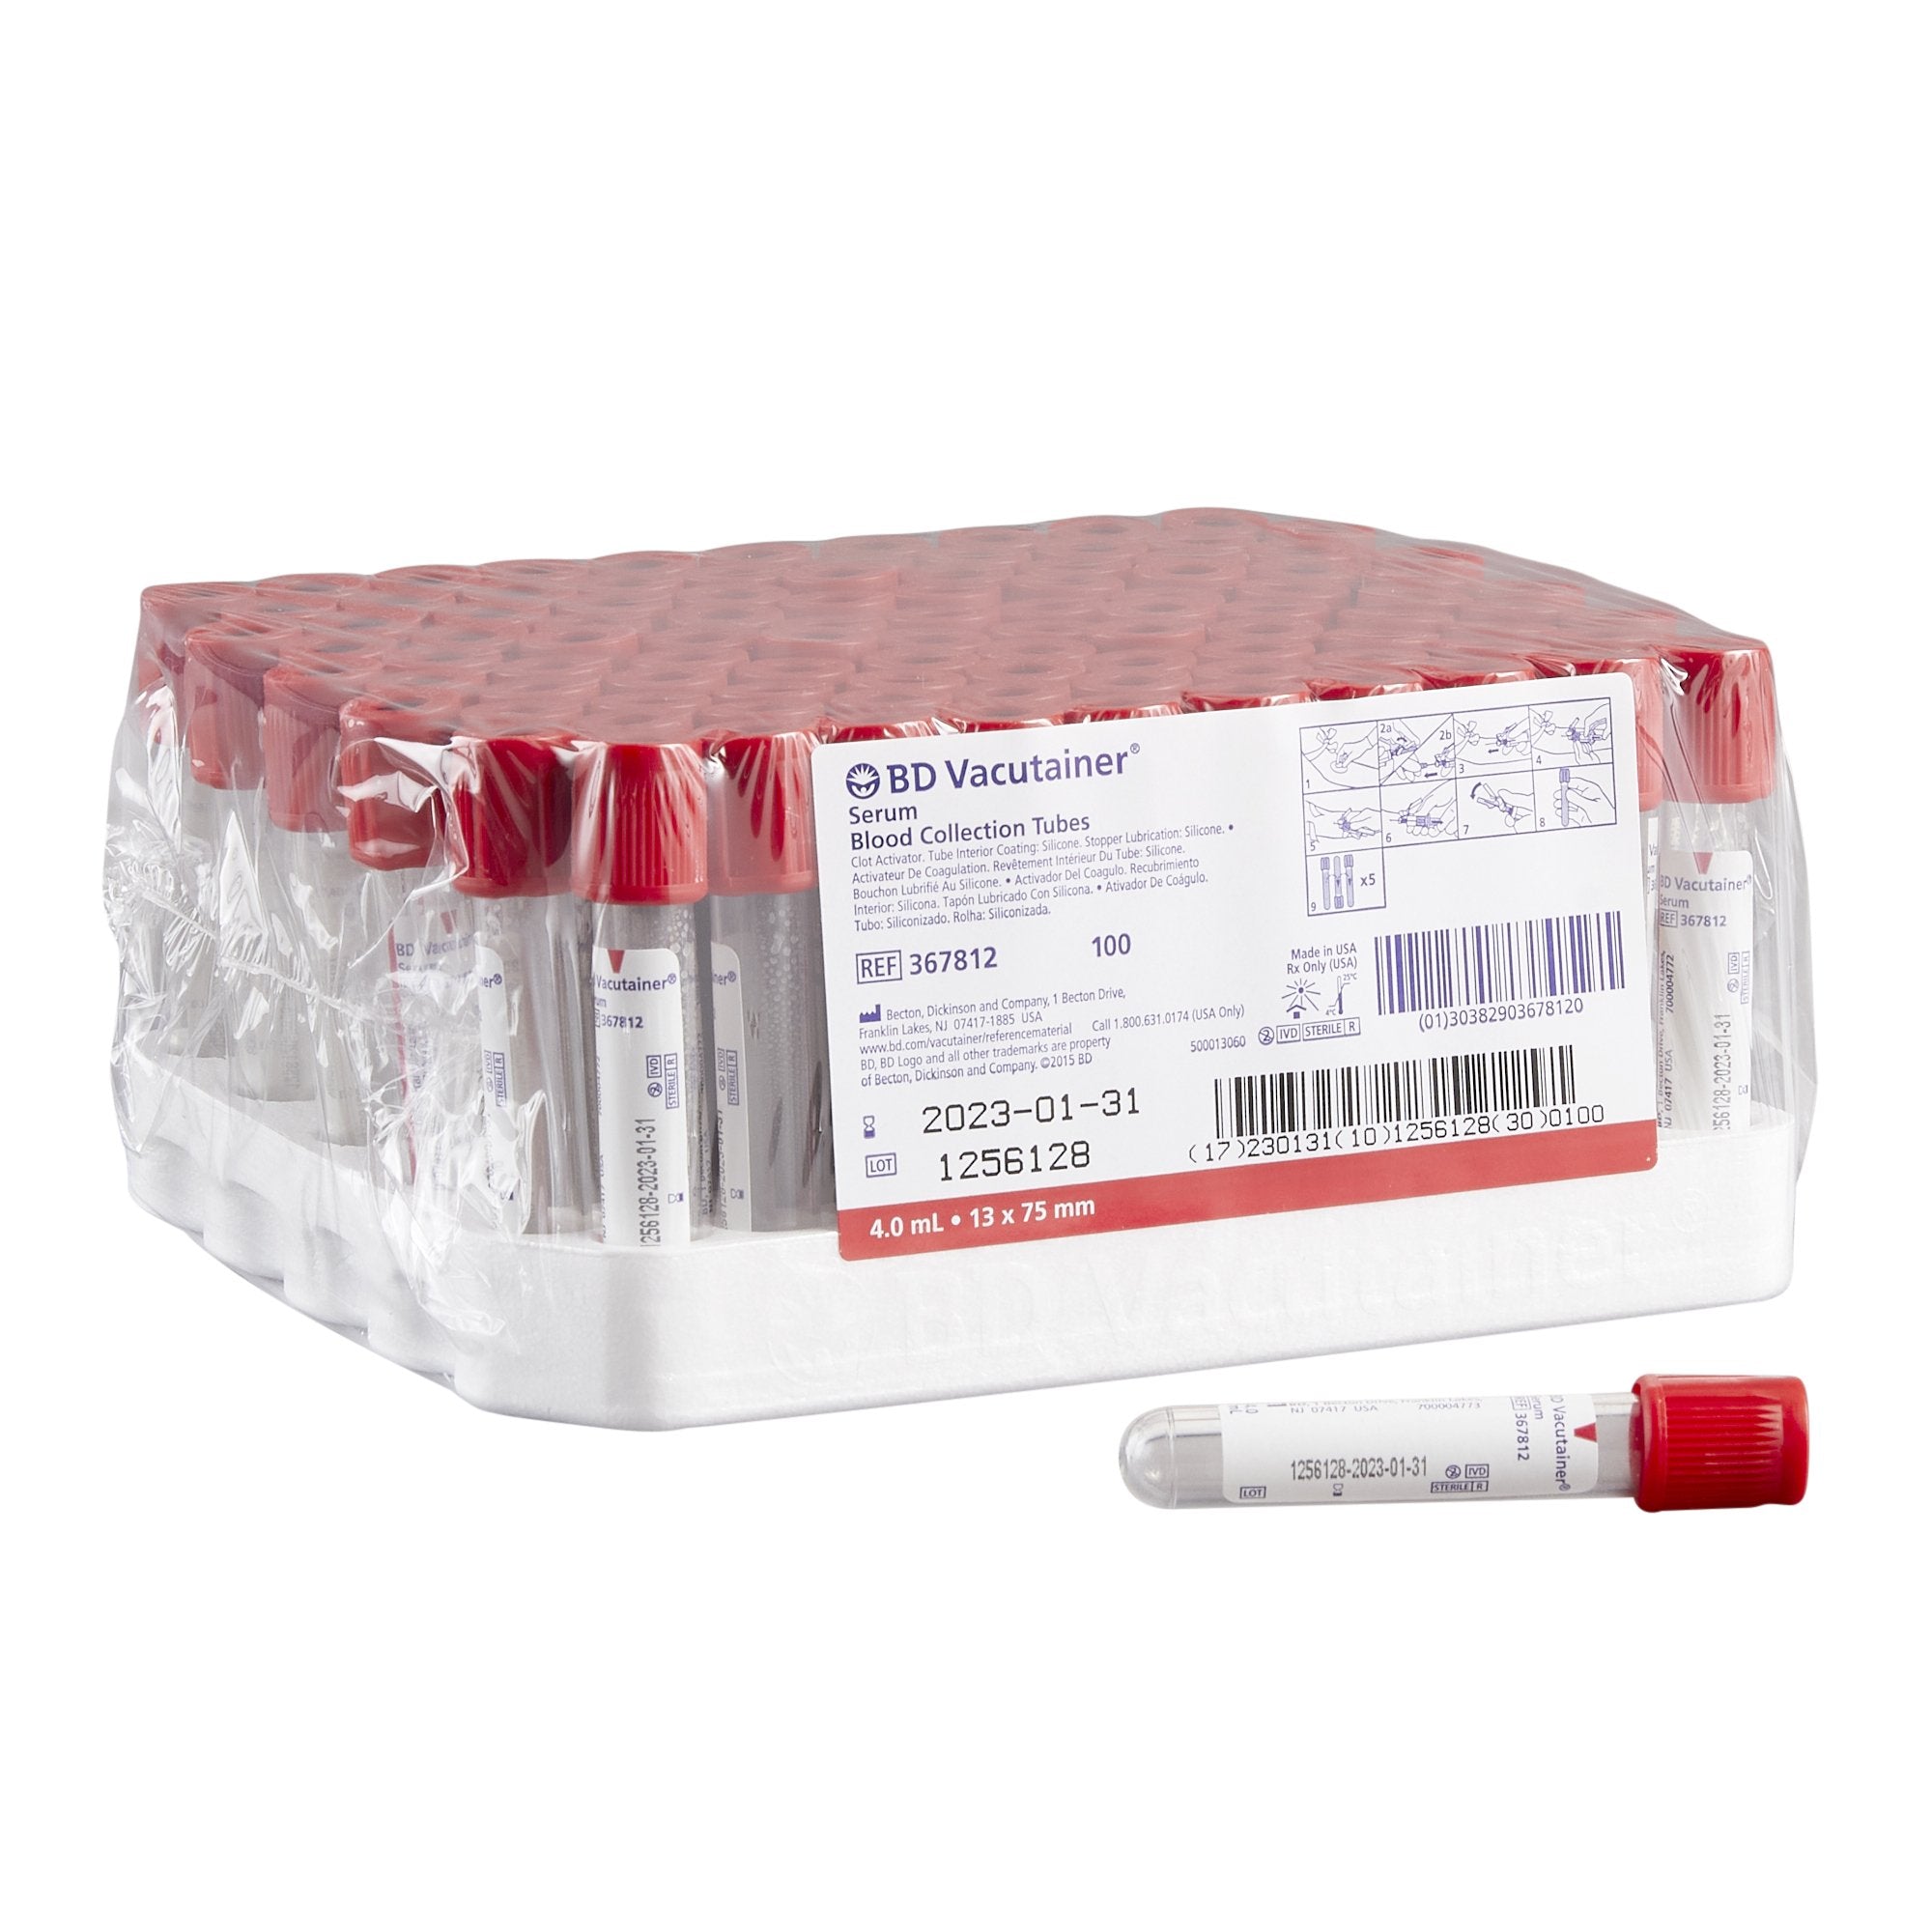 bd-medical-vacutainer-tube-blood-collection-tubes-4ml-100box